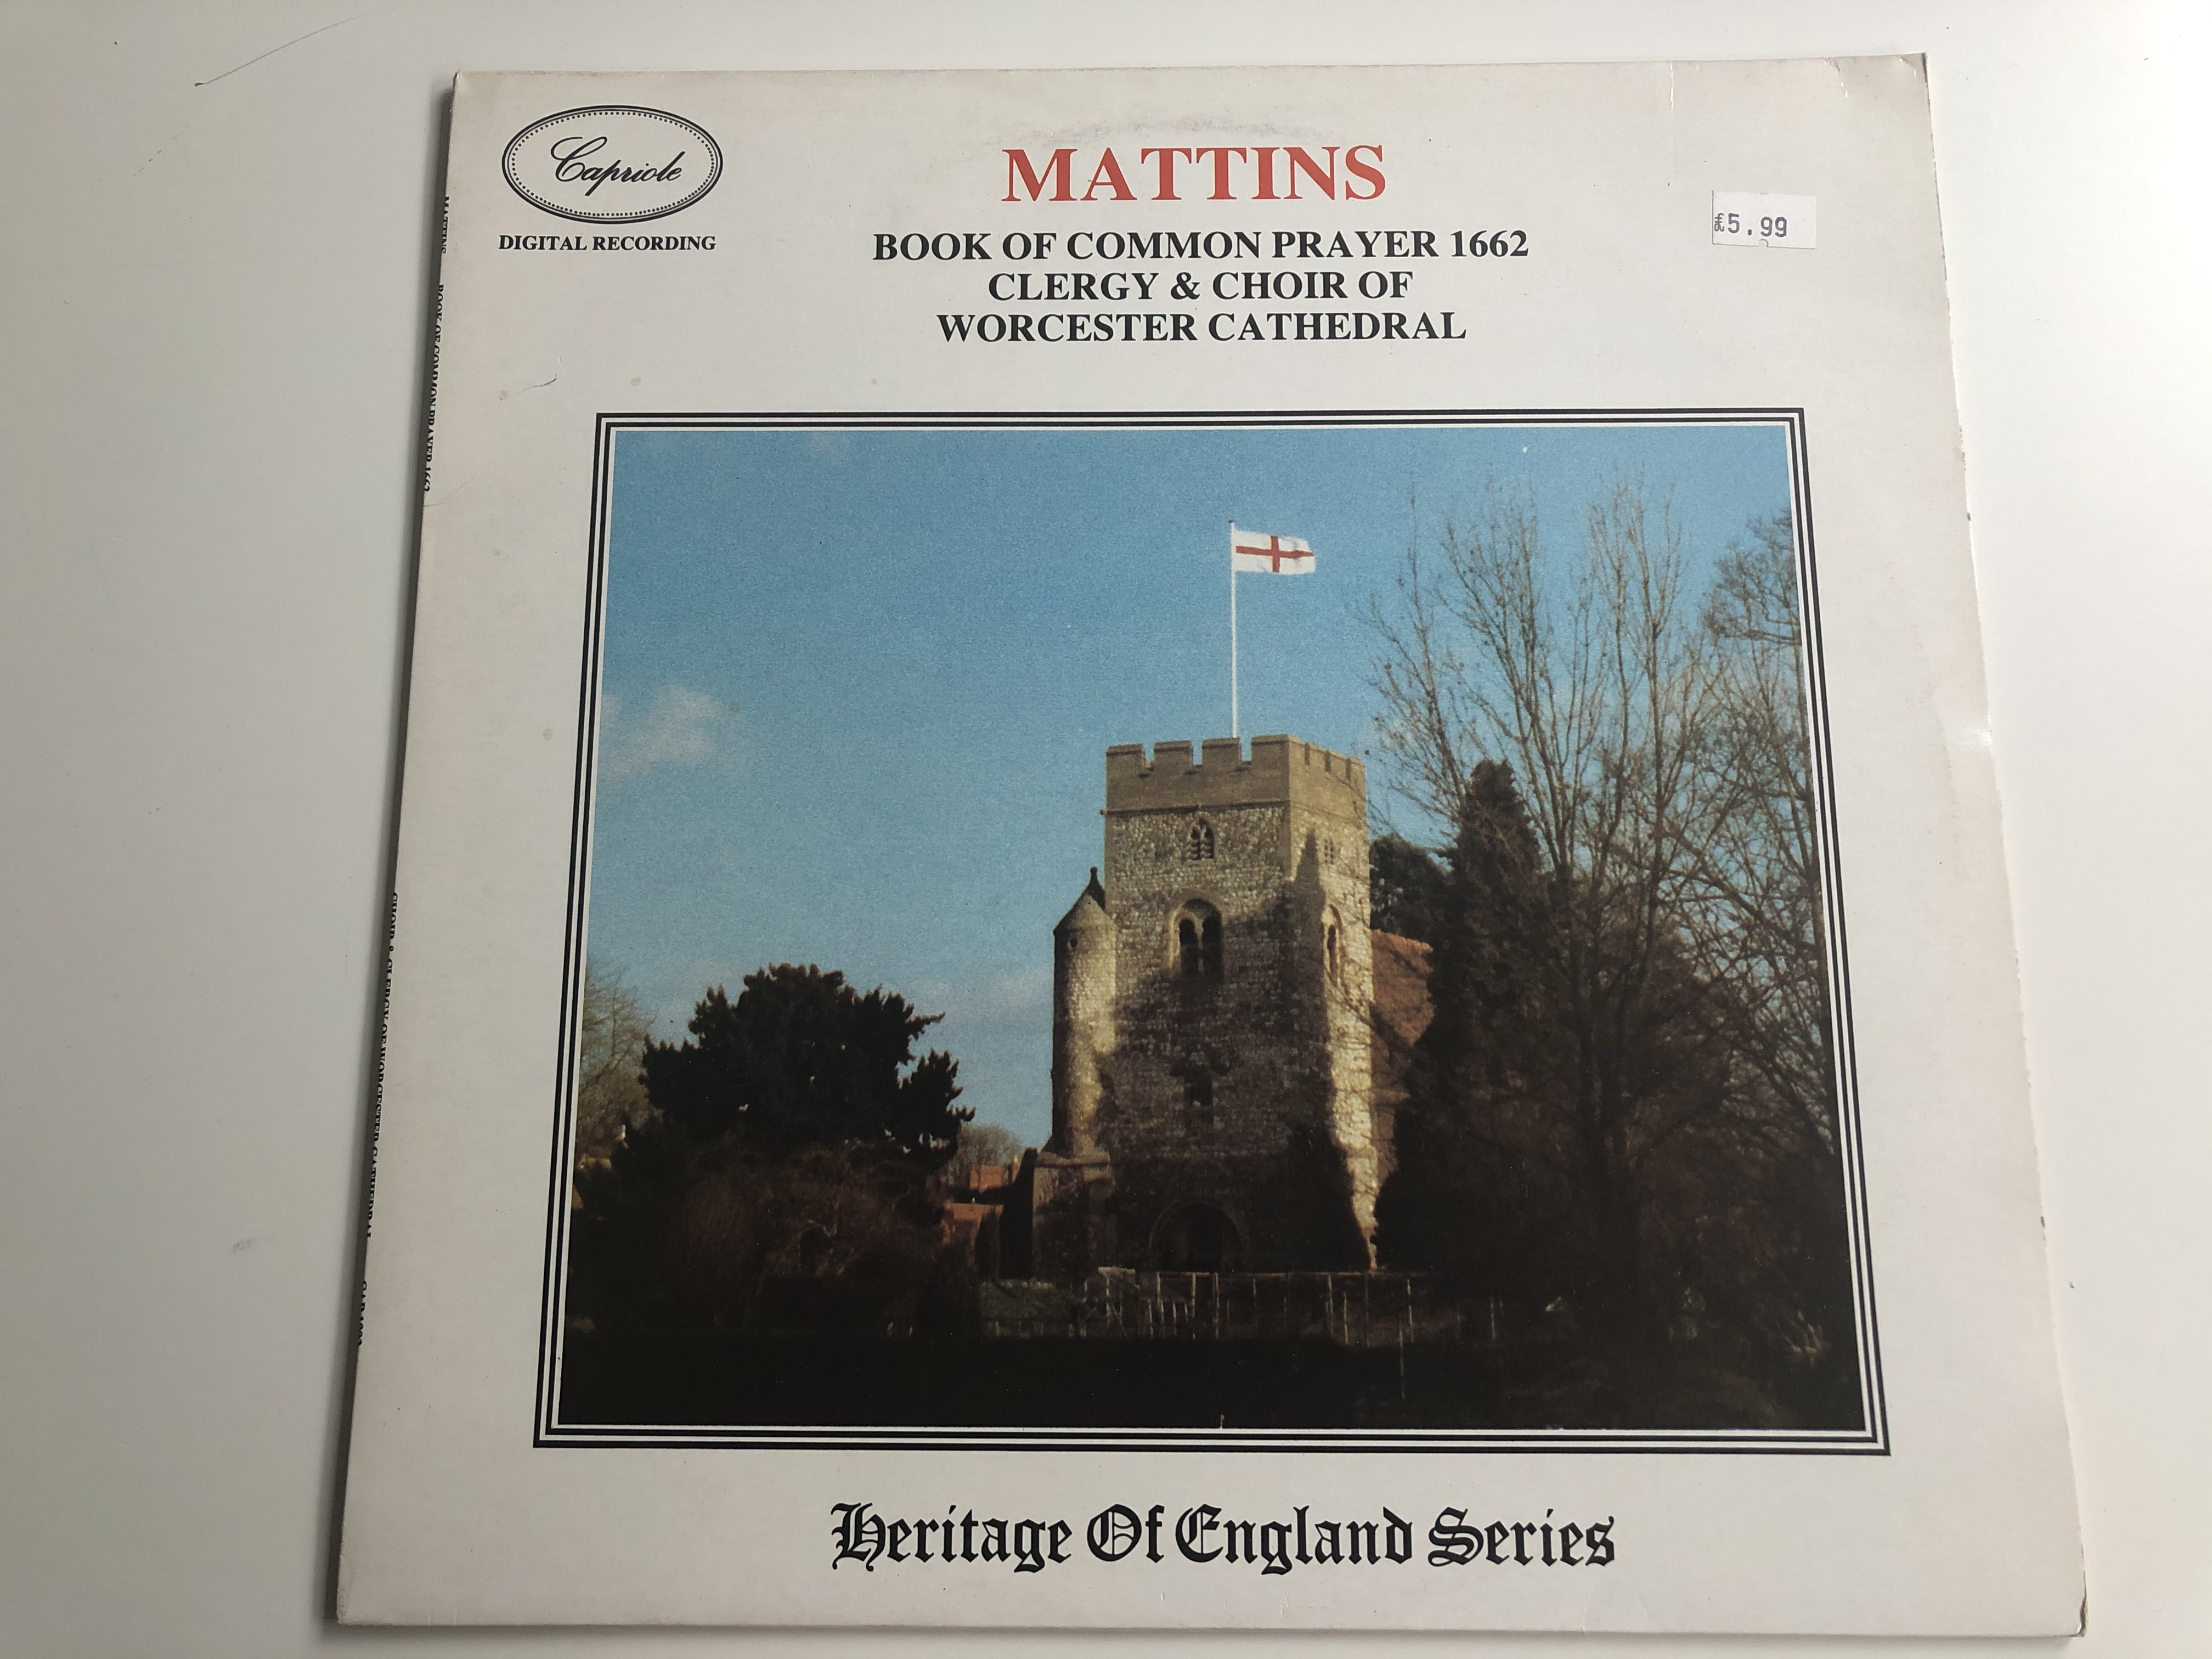 mattins-book-of-common-prayer-1662-clergy-choir-of-worcester-cathedral-heritage-of-england-series-capriole-lp-1984-stereo-cap-1002-1-.jpg